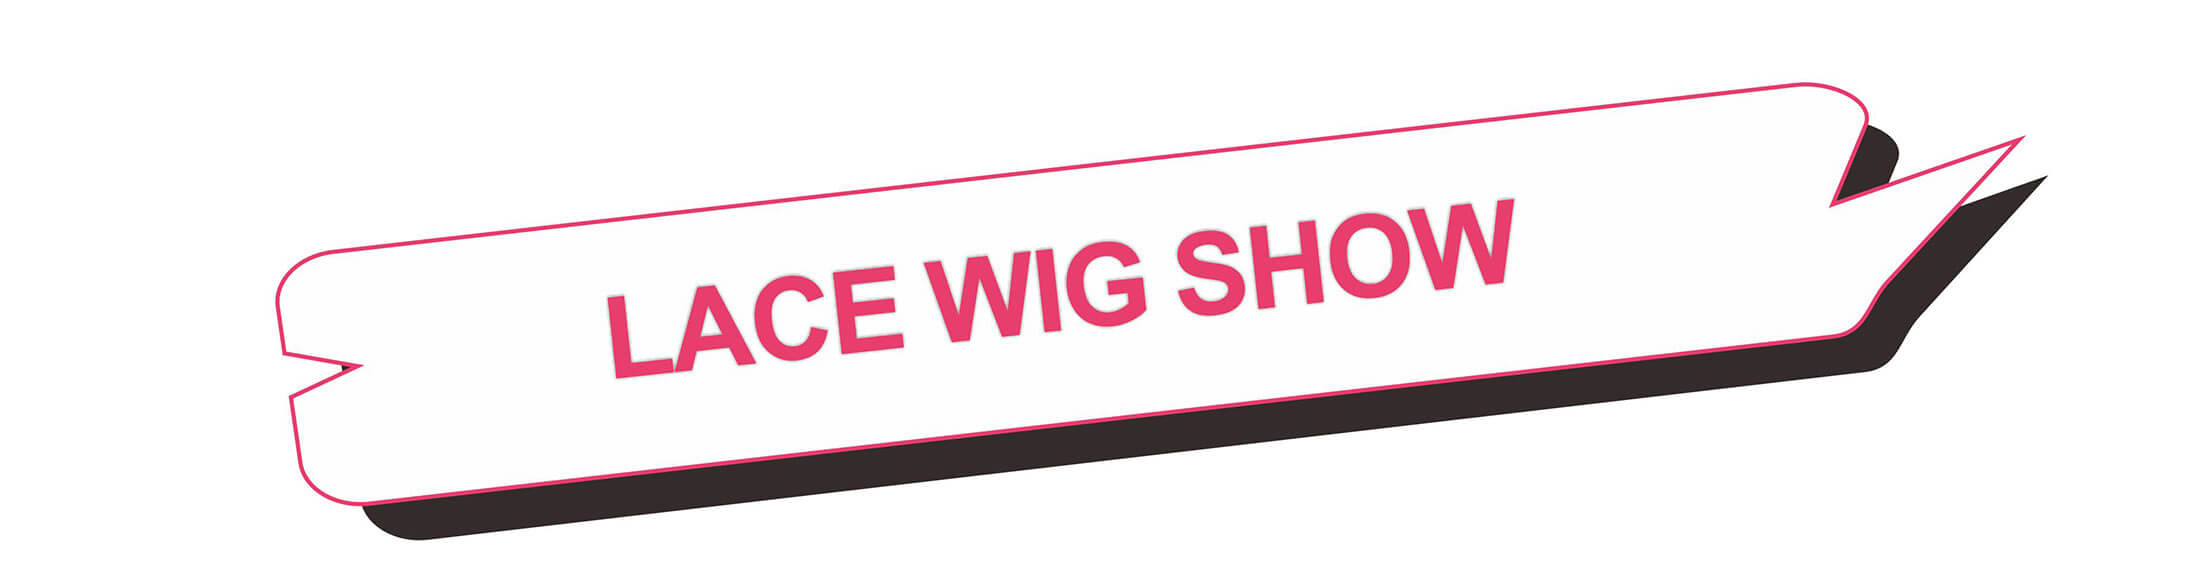 lace wig show